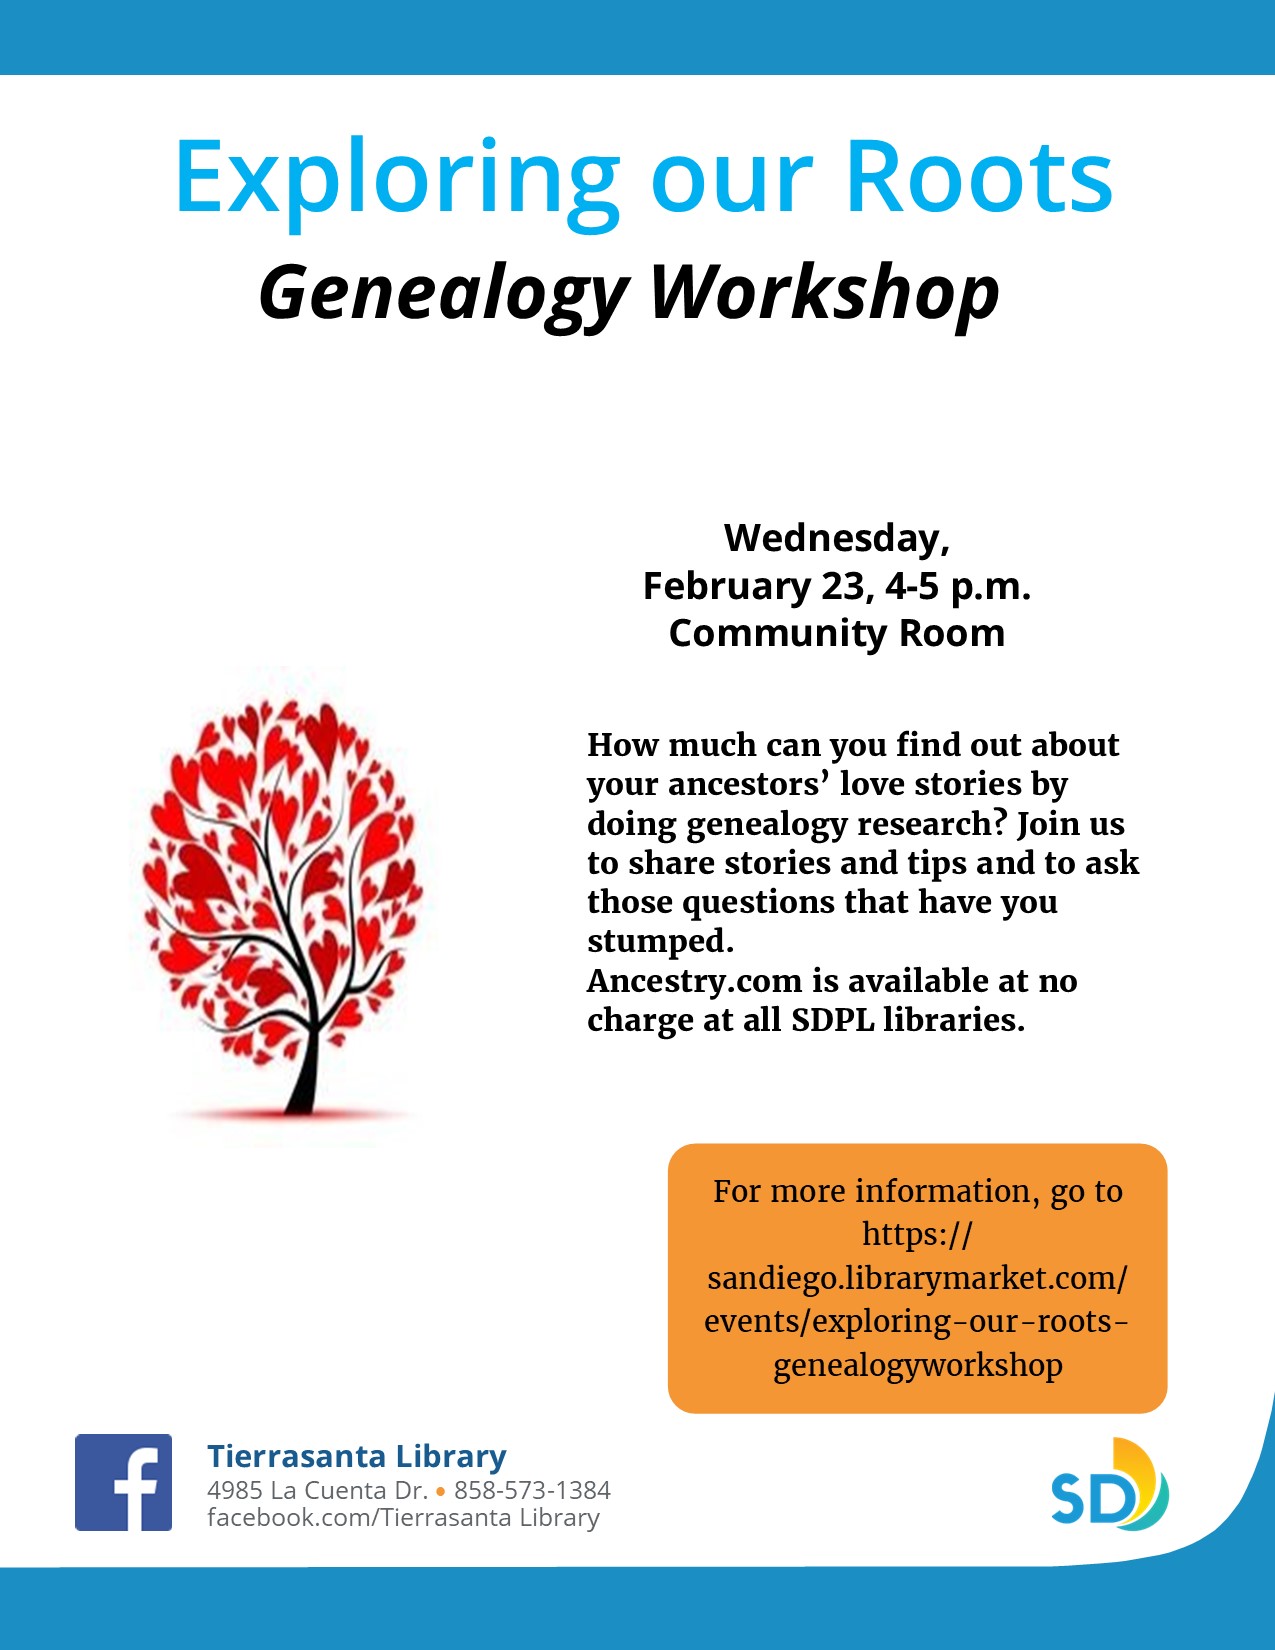 Genealogy tips, ideas and sharing focusing on ancestral love stories.